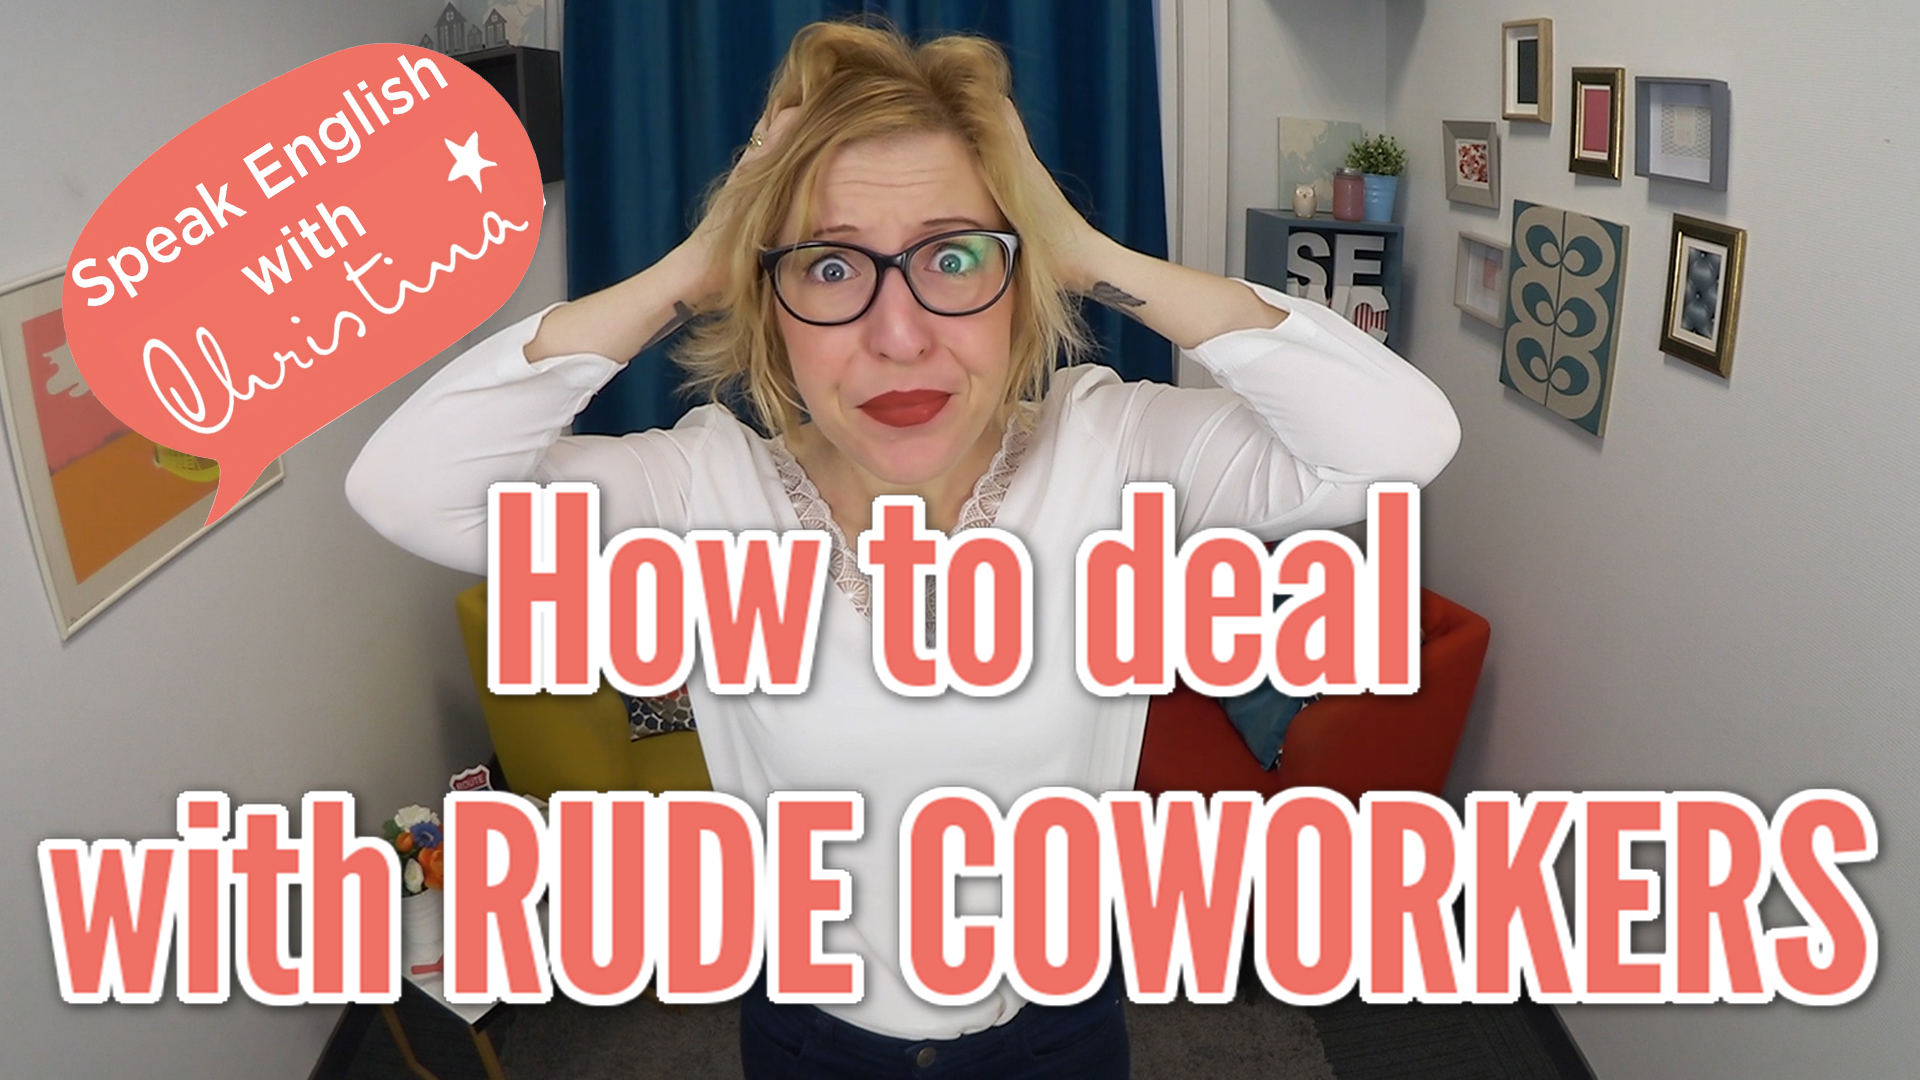 How to deal with rude coworkers